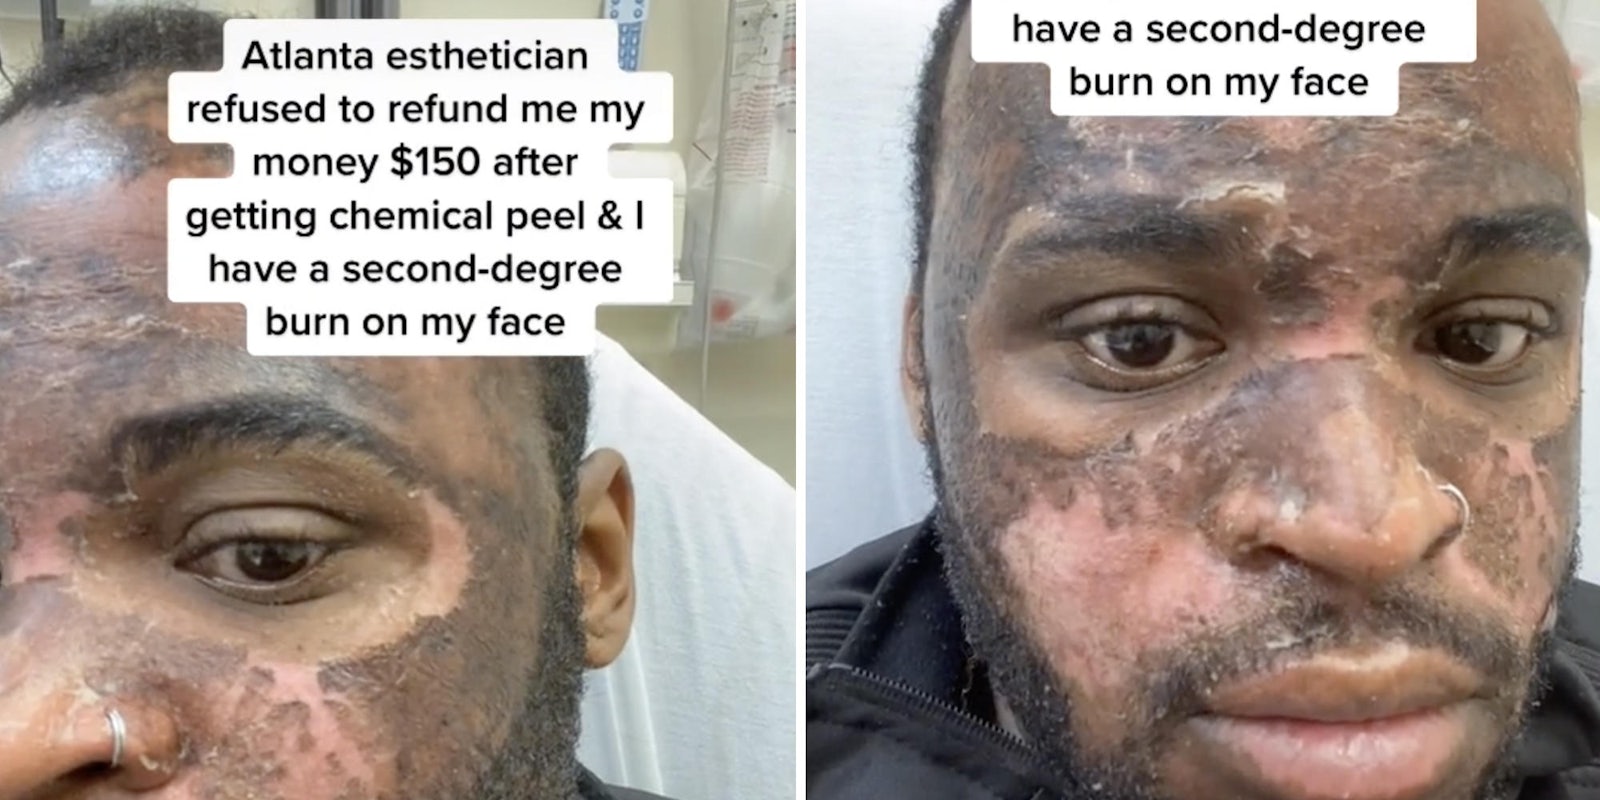 man with burns on his face